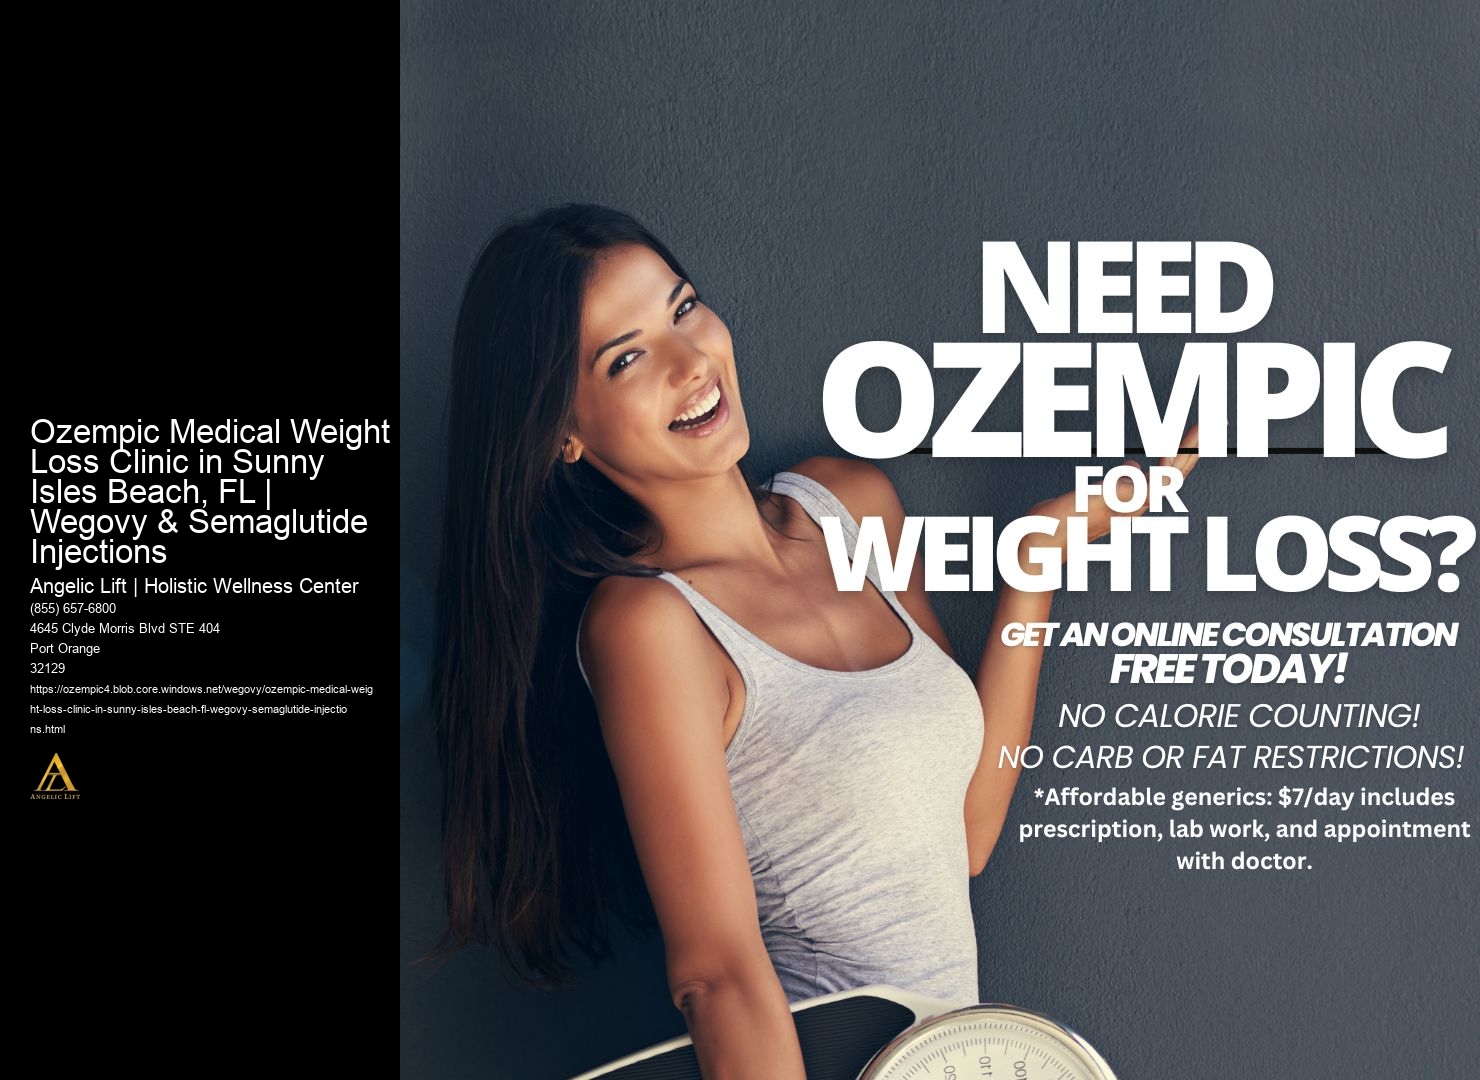 Ozempic Medical Weight Loss Clinic in Sunny Isles Beach, FL | Wegovy & Semaglutide Injections